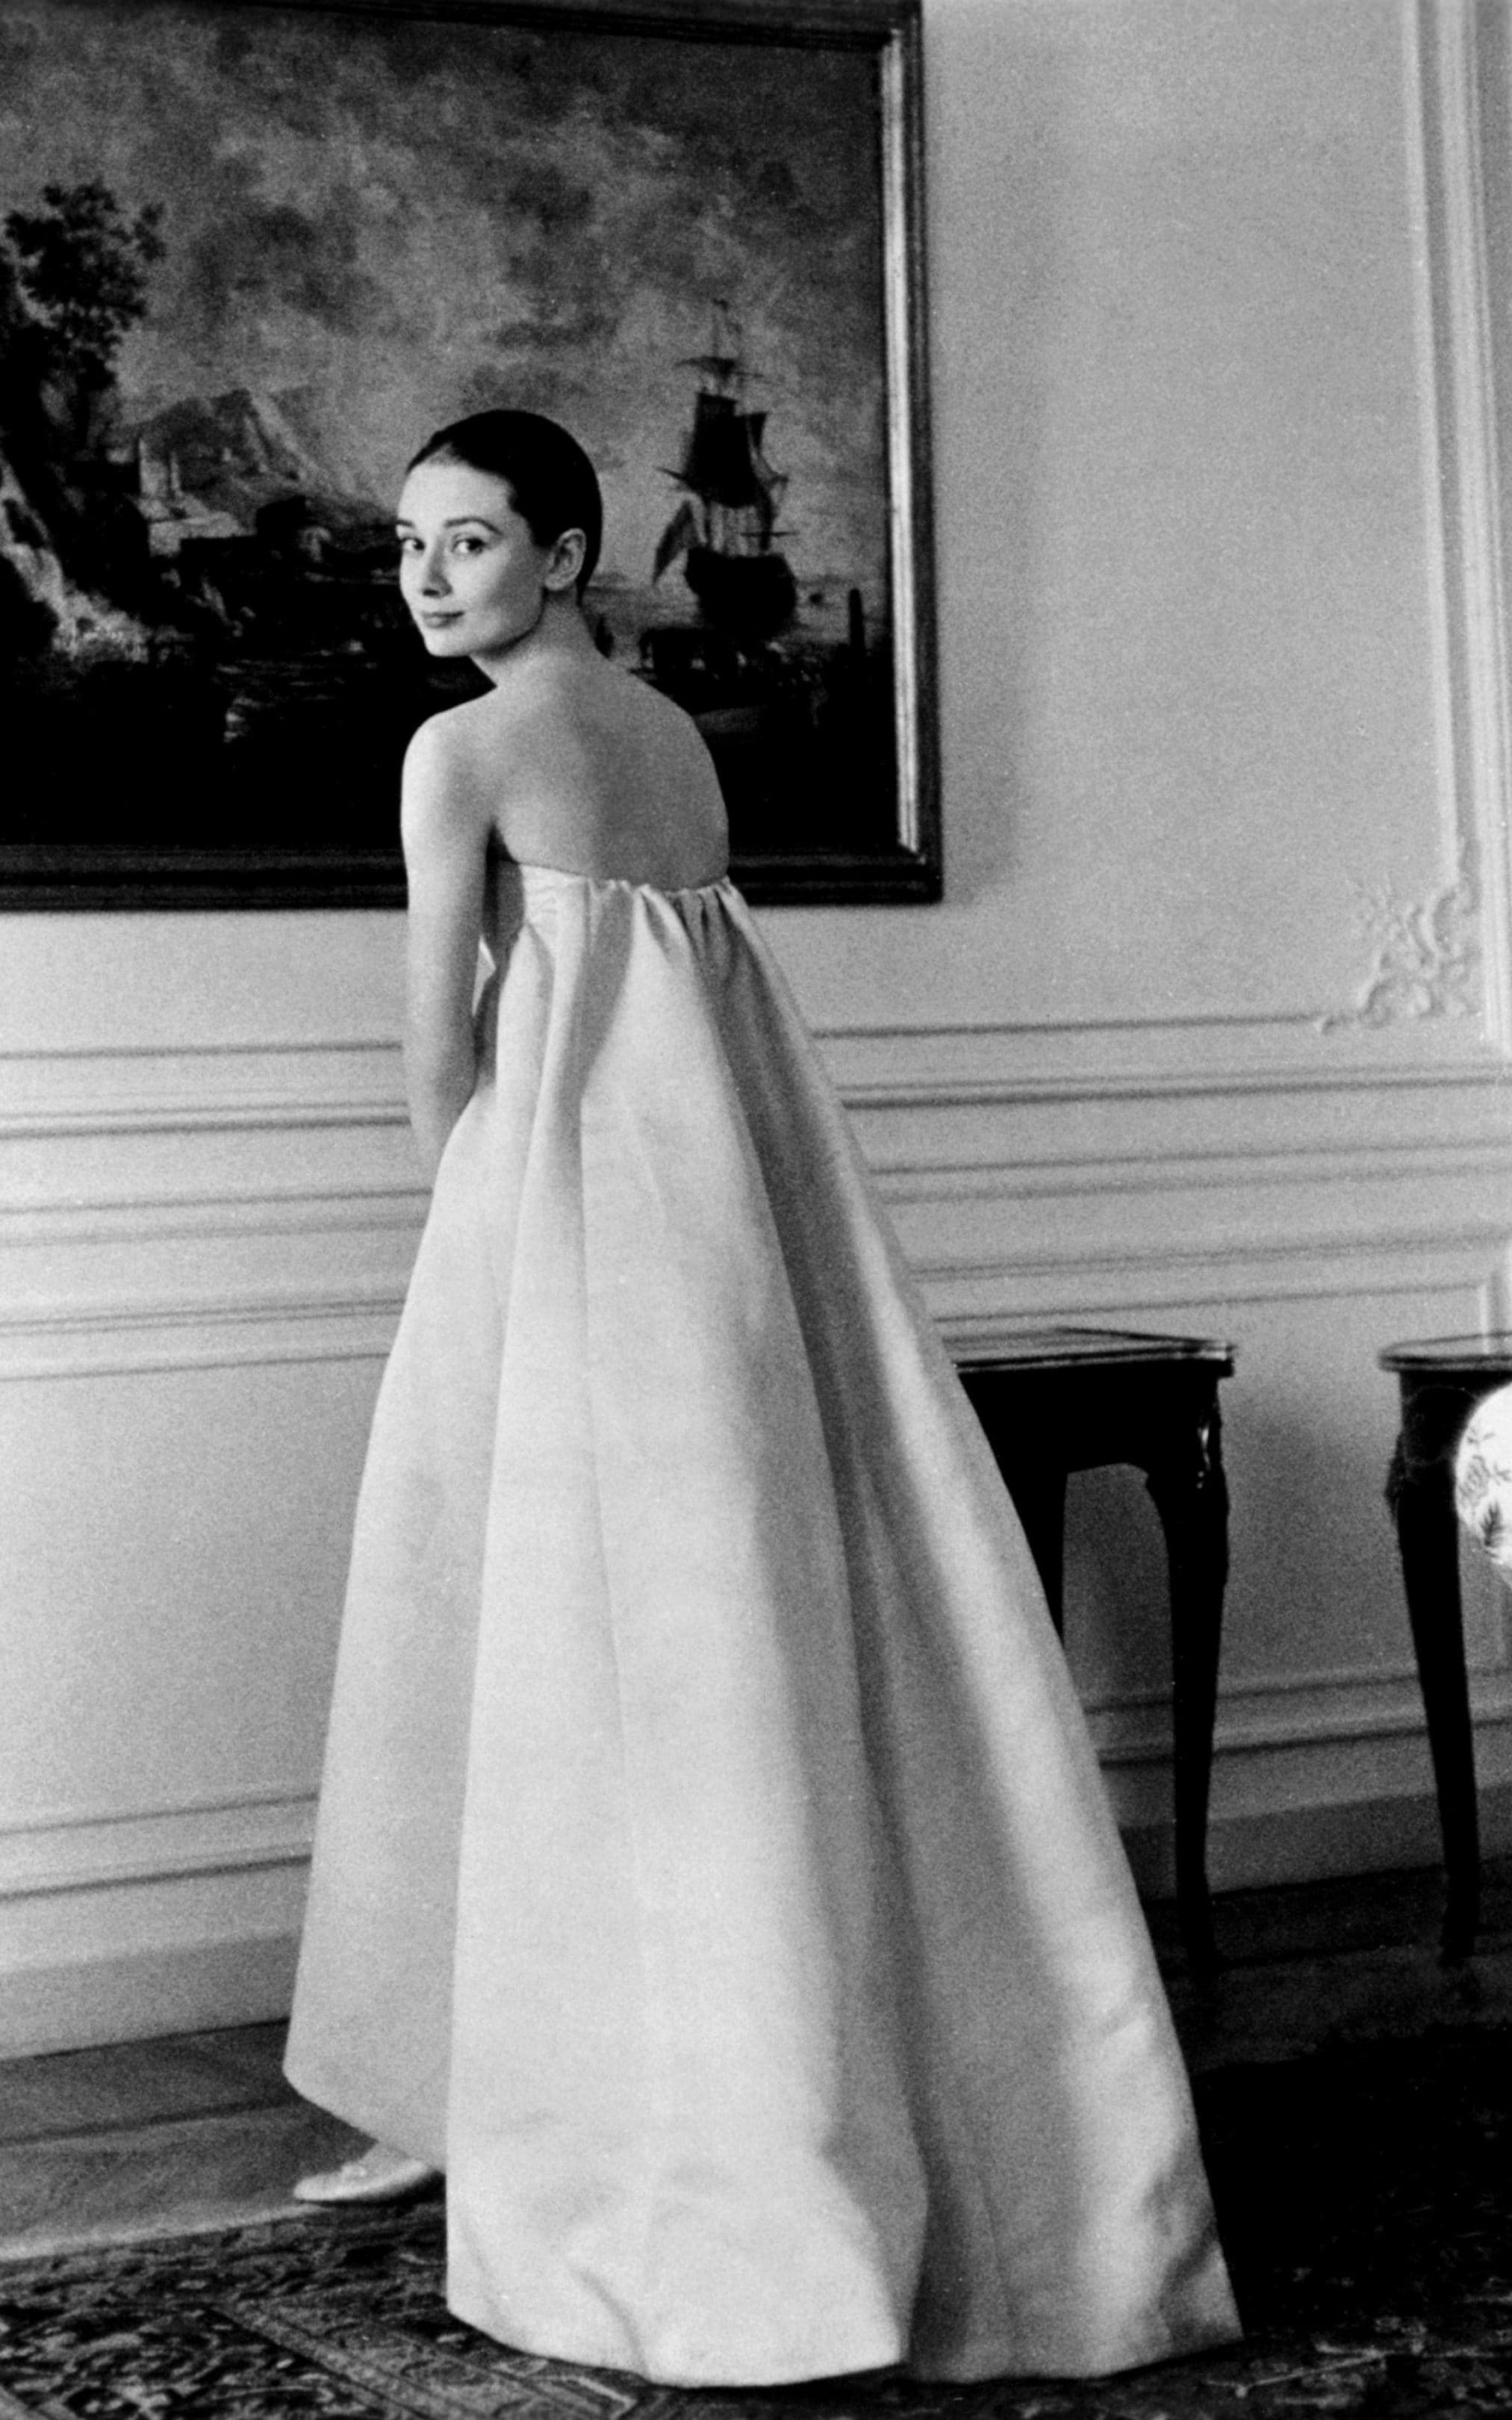 Audrey Hepburn in strapless gown designed by Hubert de Givenchy, 1957